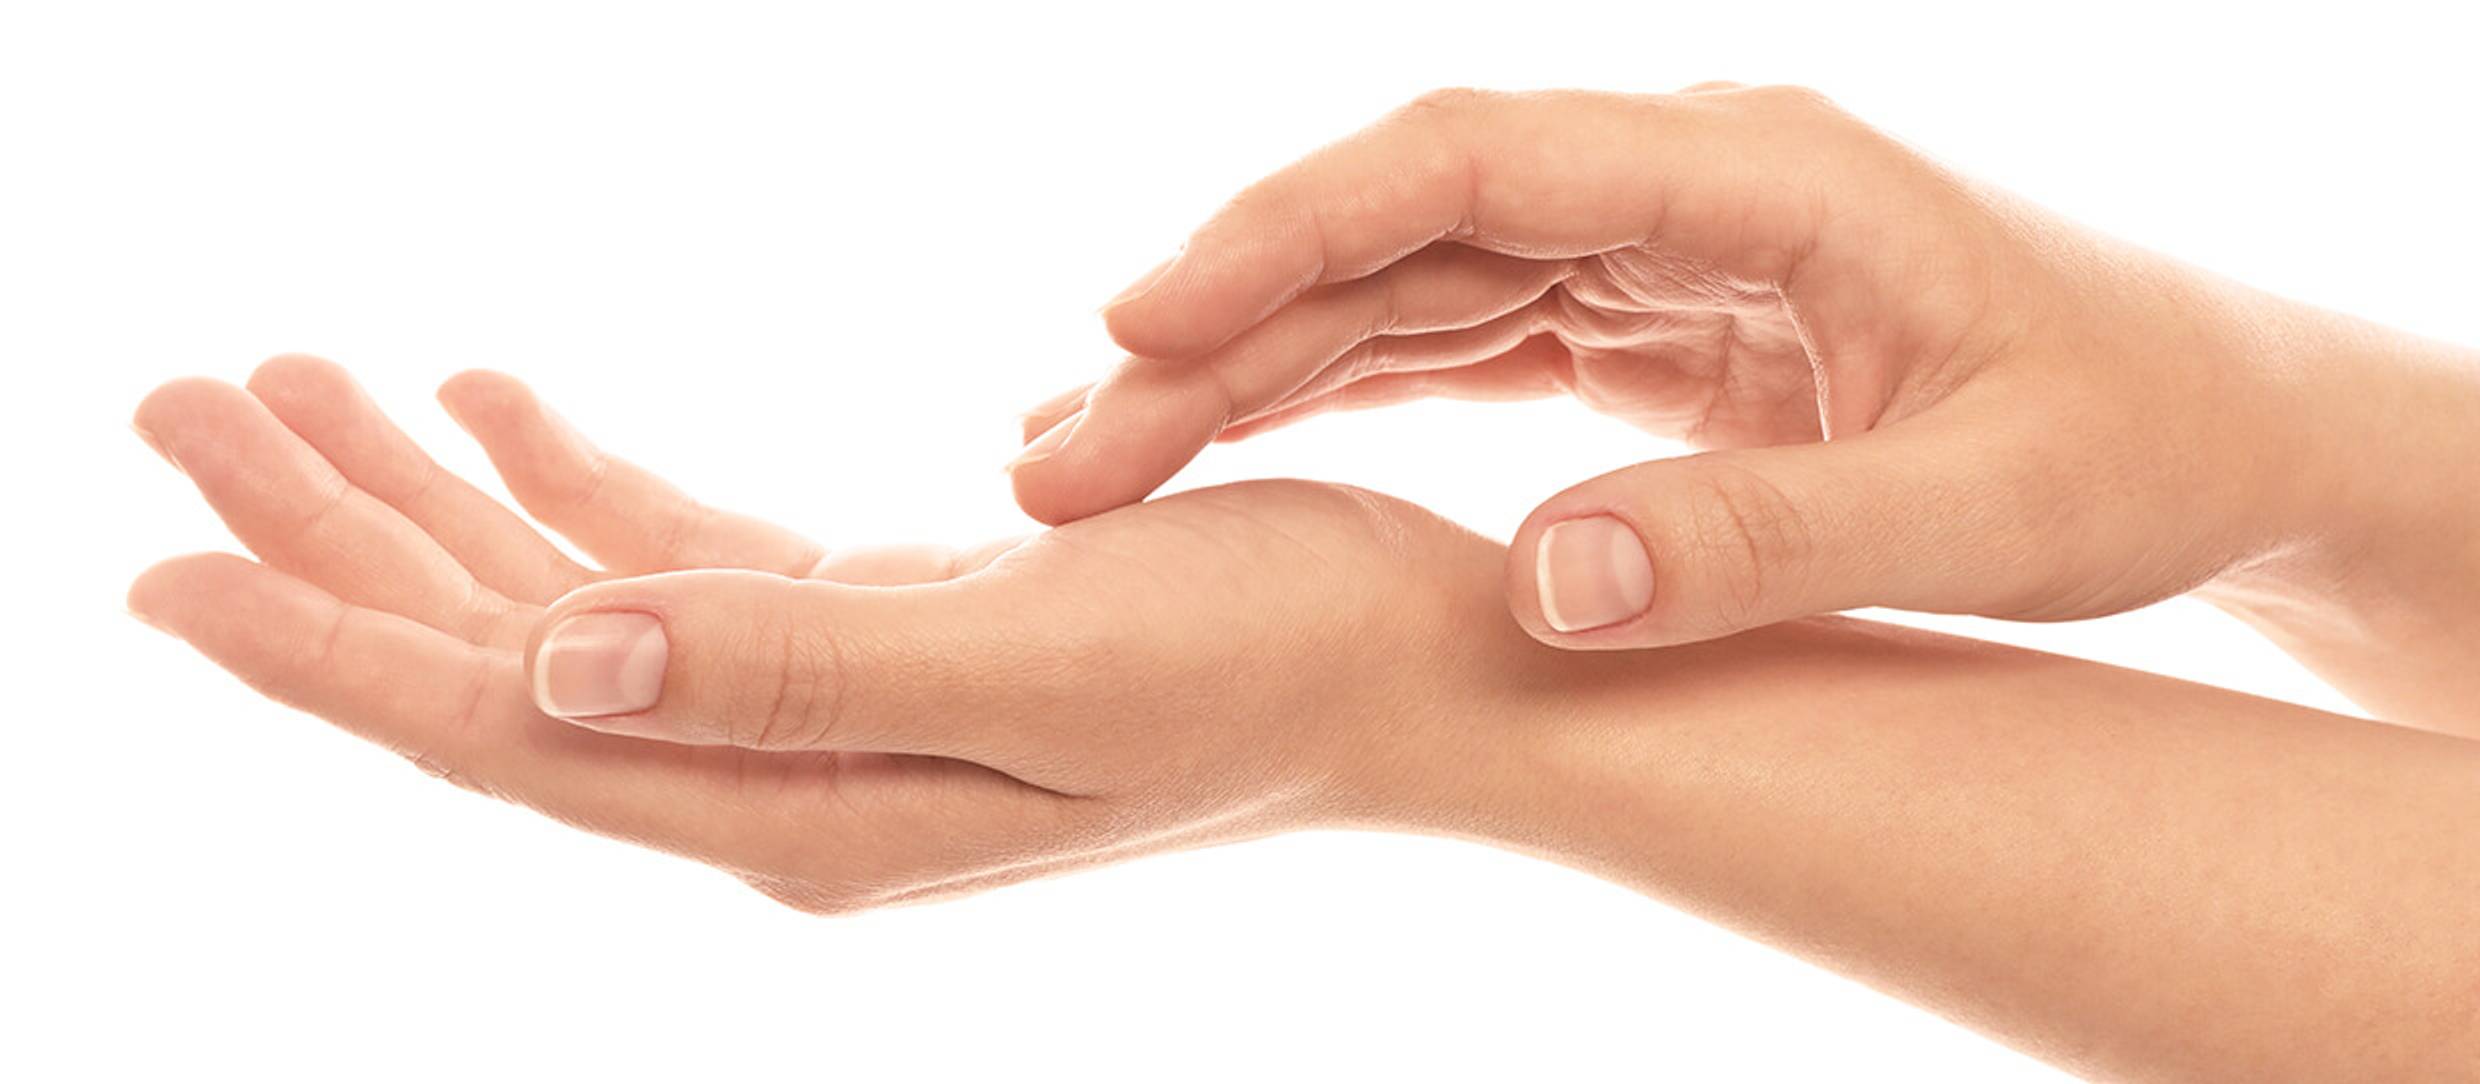 Contact Dermatitis Hands Causes and Relief